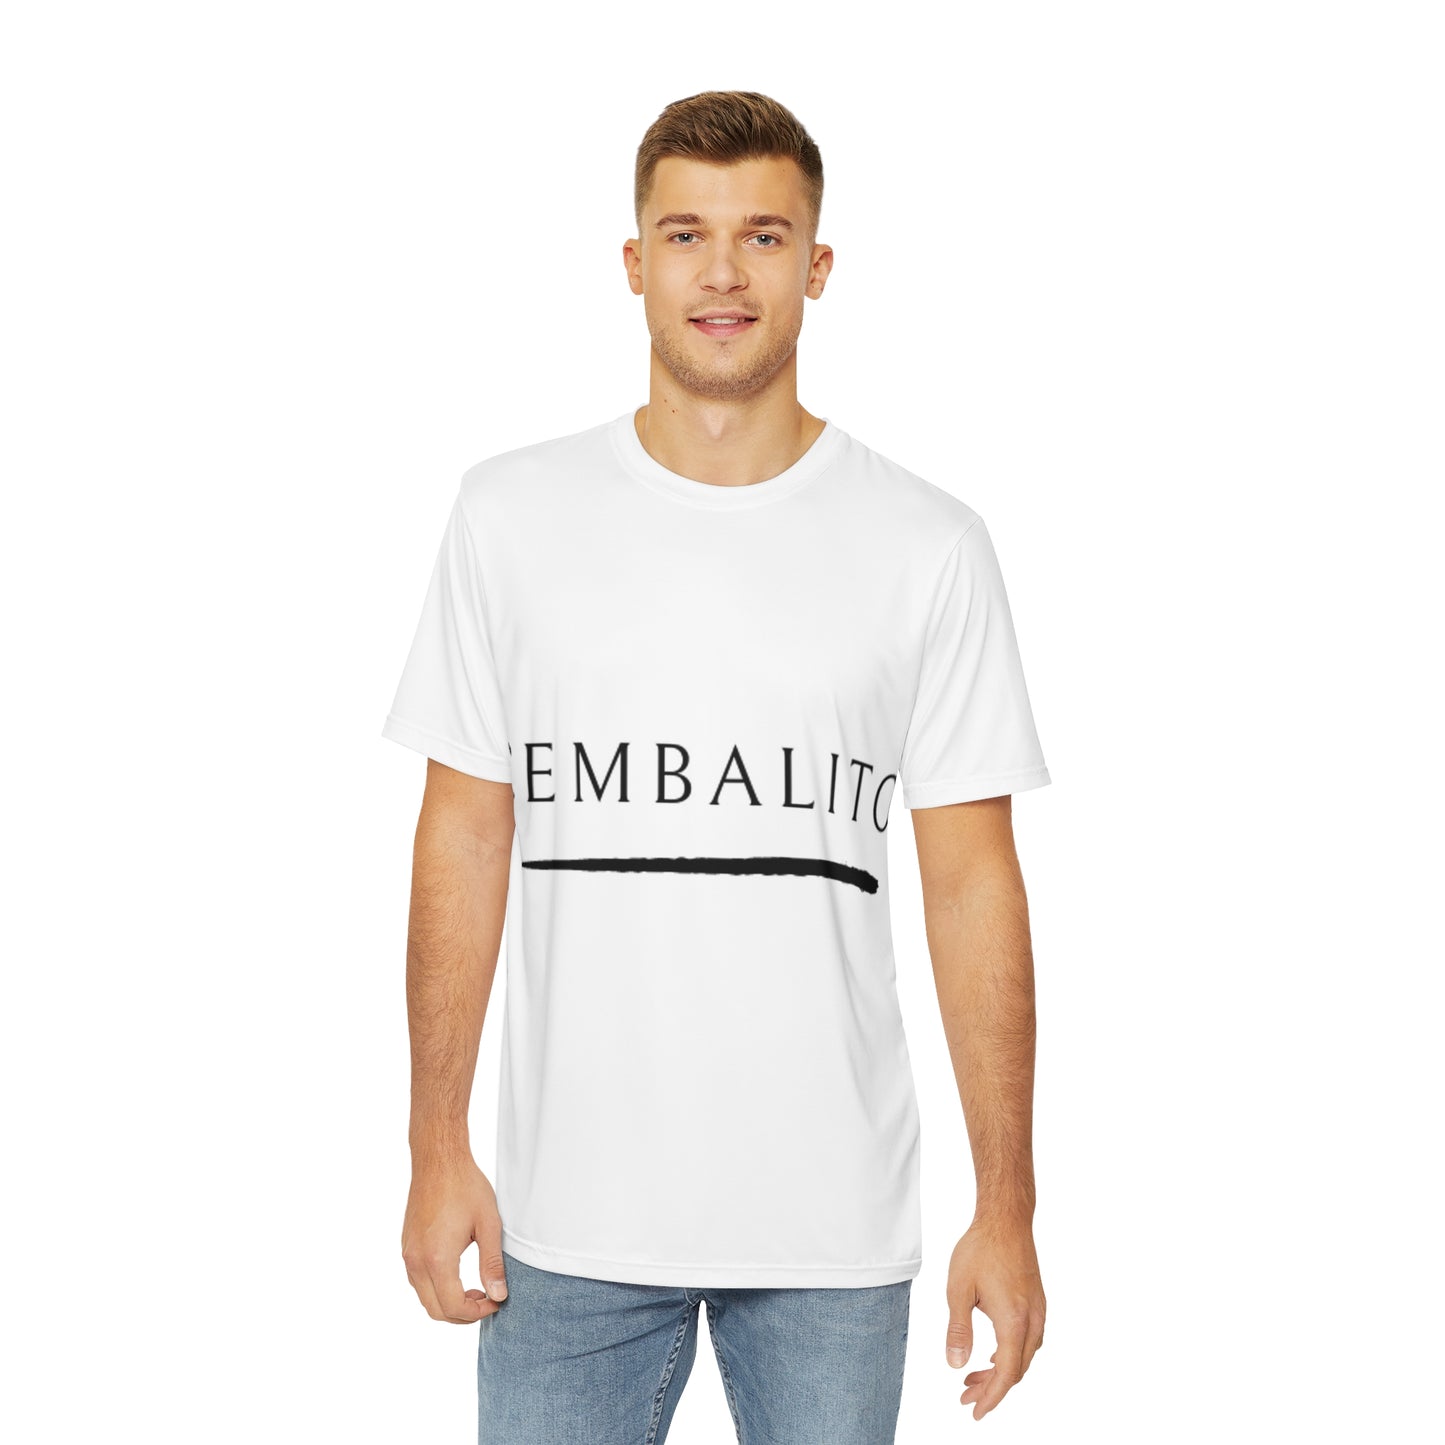 Men's Polyester Tee  - Cembalito